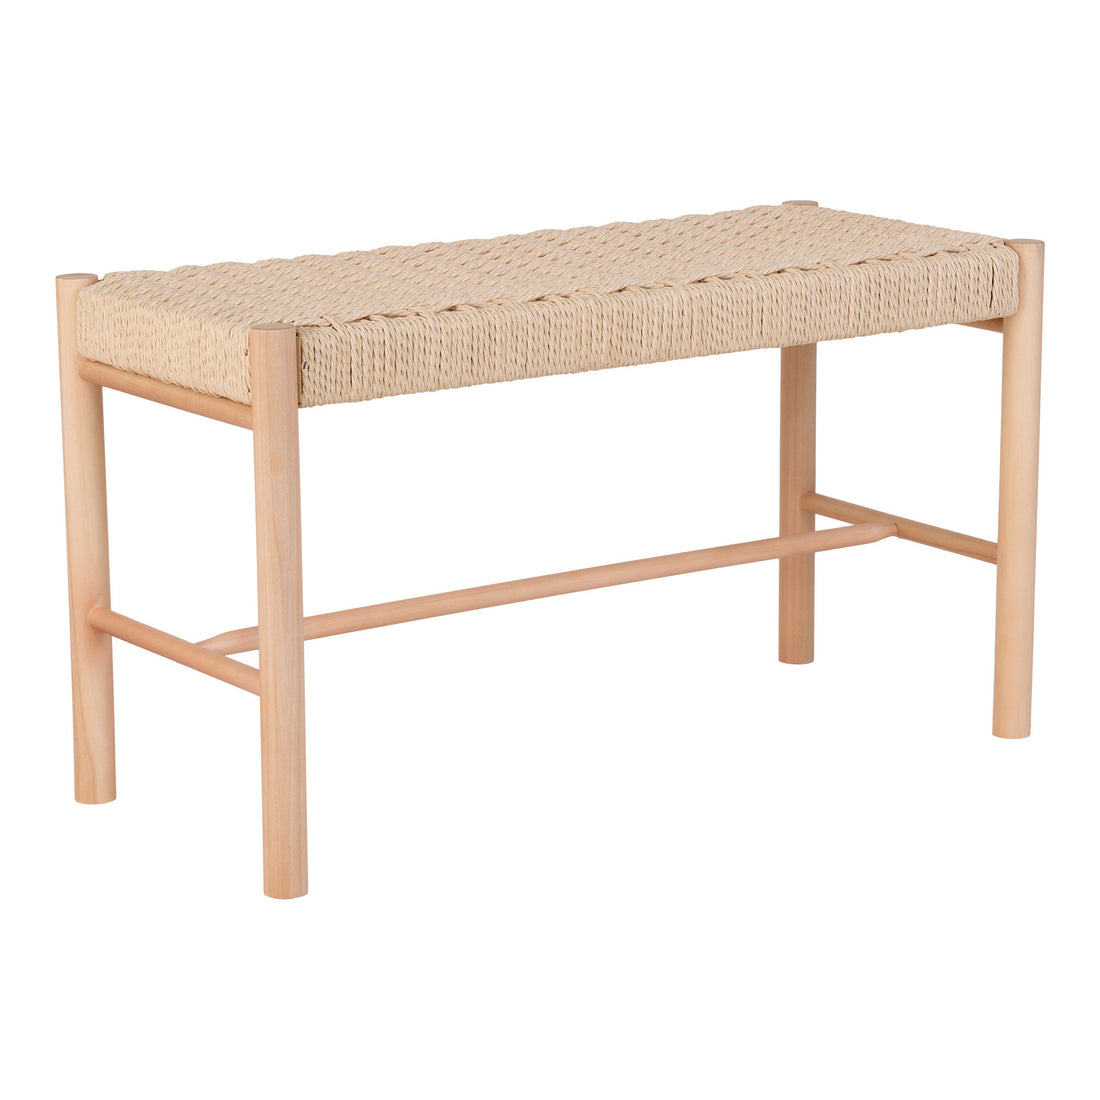 Abano bench - bench in poplar with natural braid seat, nature, 35x80x45 cm - 1 - pcs